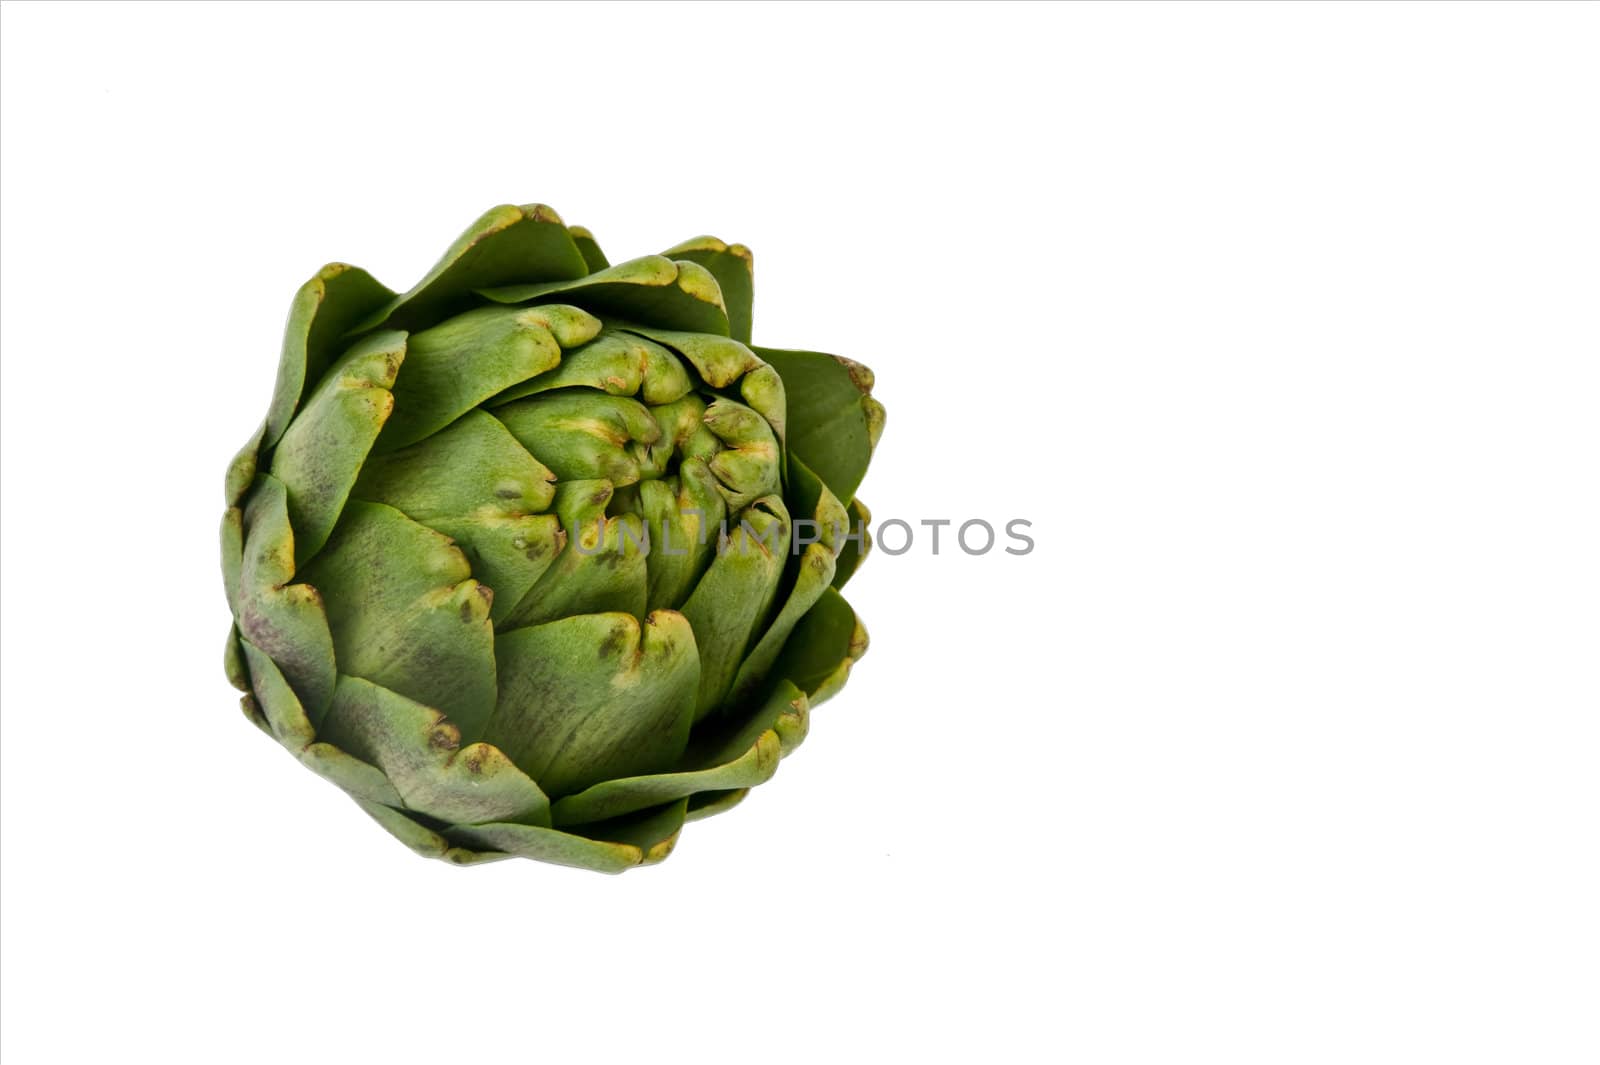 Image of an artichoke on a white background